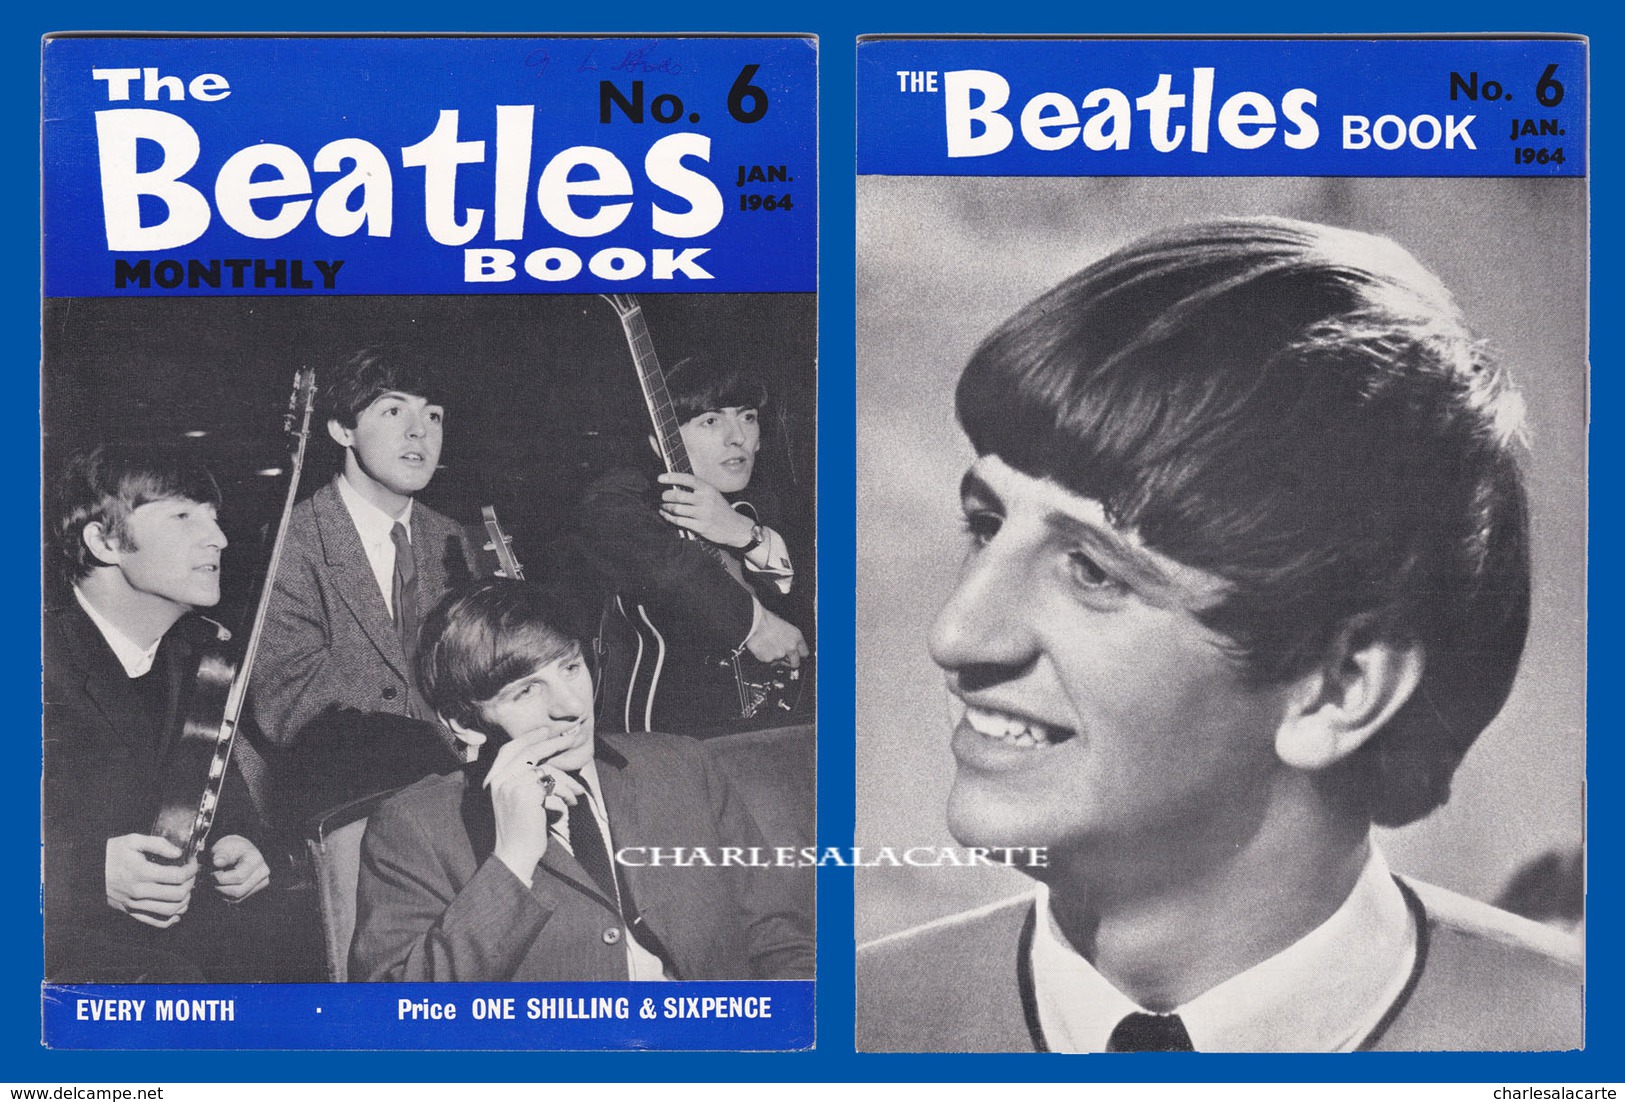 1964 JANUARY THE BEATLES MONTHLY BOOK No.6 AUTHENTIC SUBERB CONDITION SEE THE SCAN - Divertissement